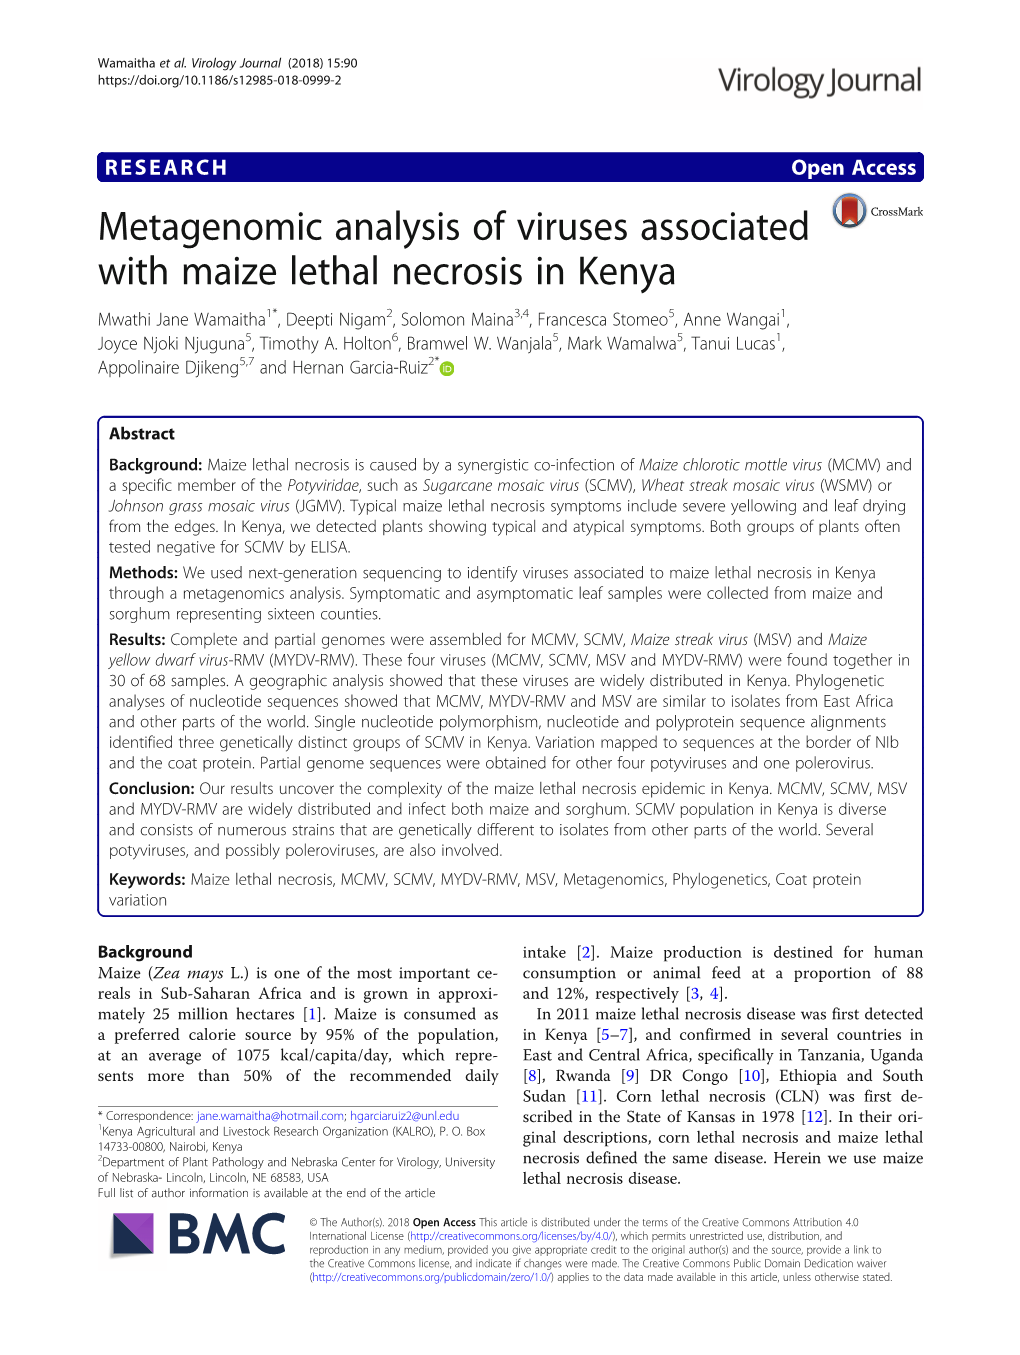 Metagenomic Analysis of Viruses Associated with Maize Lethal